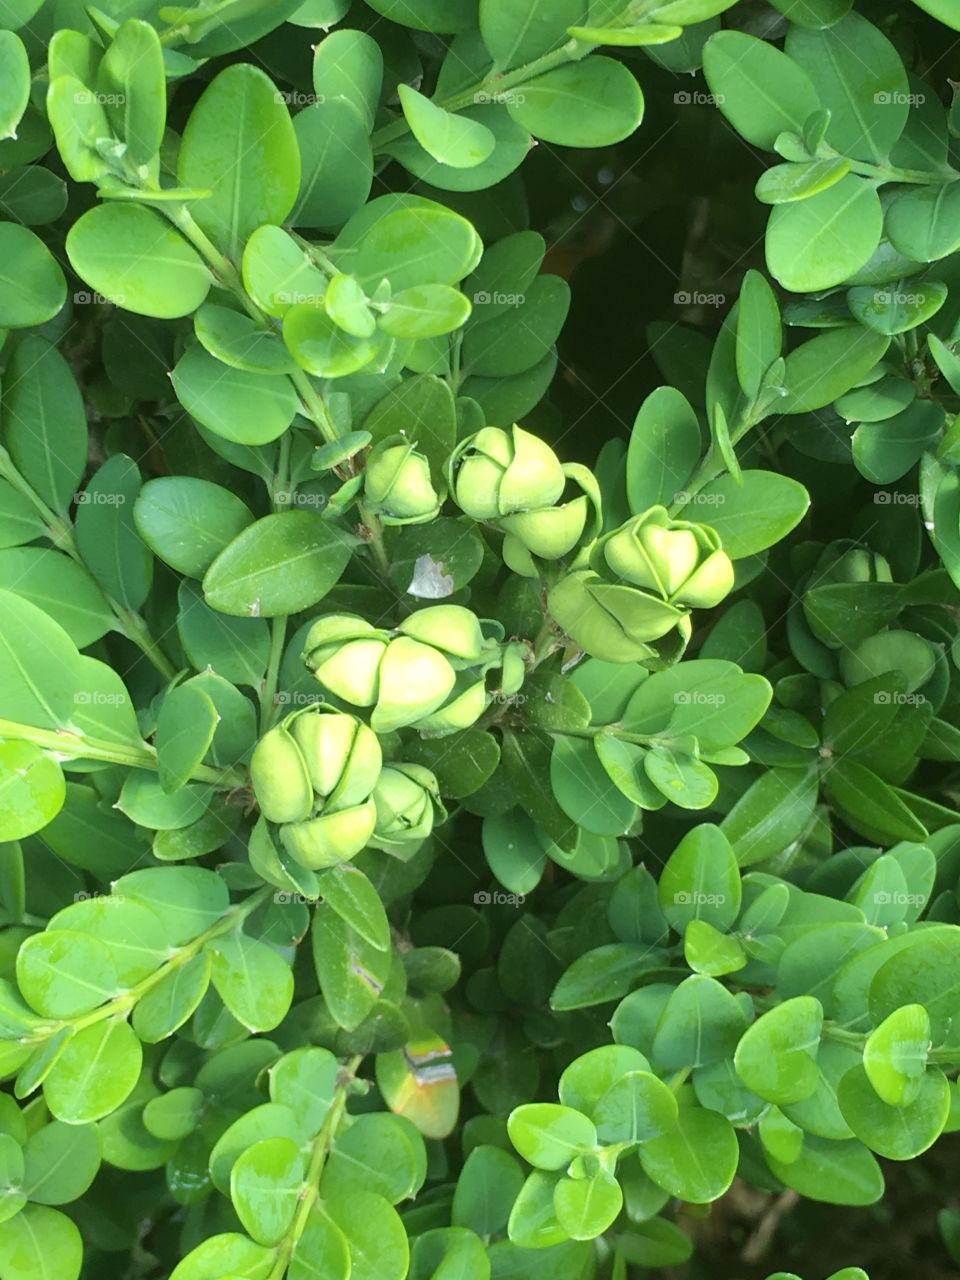 Boxwood leaves just opening up